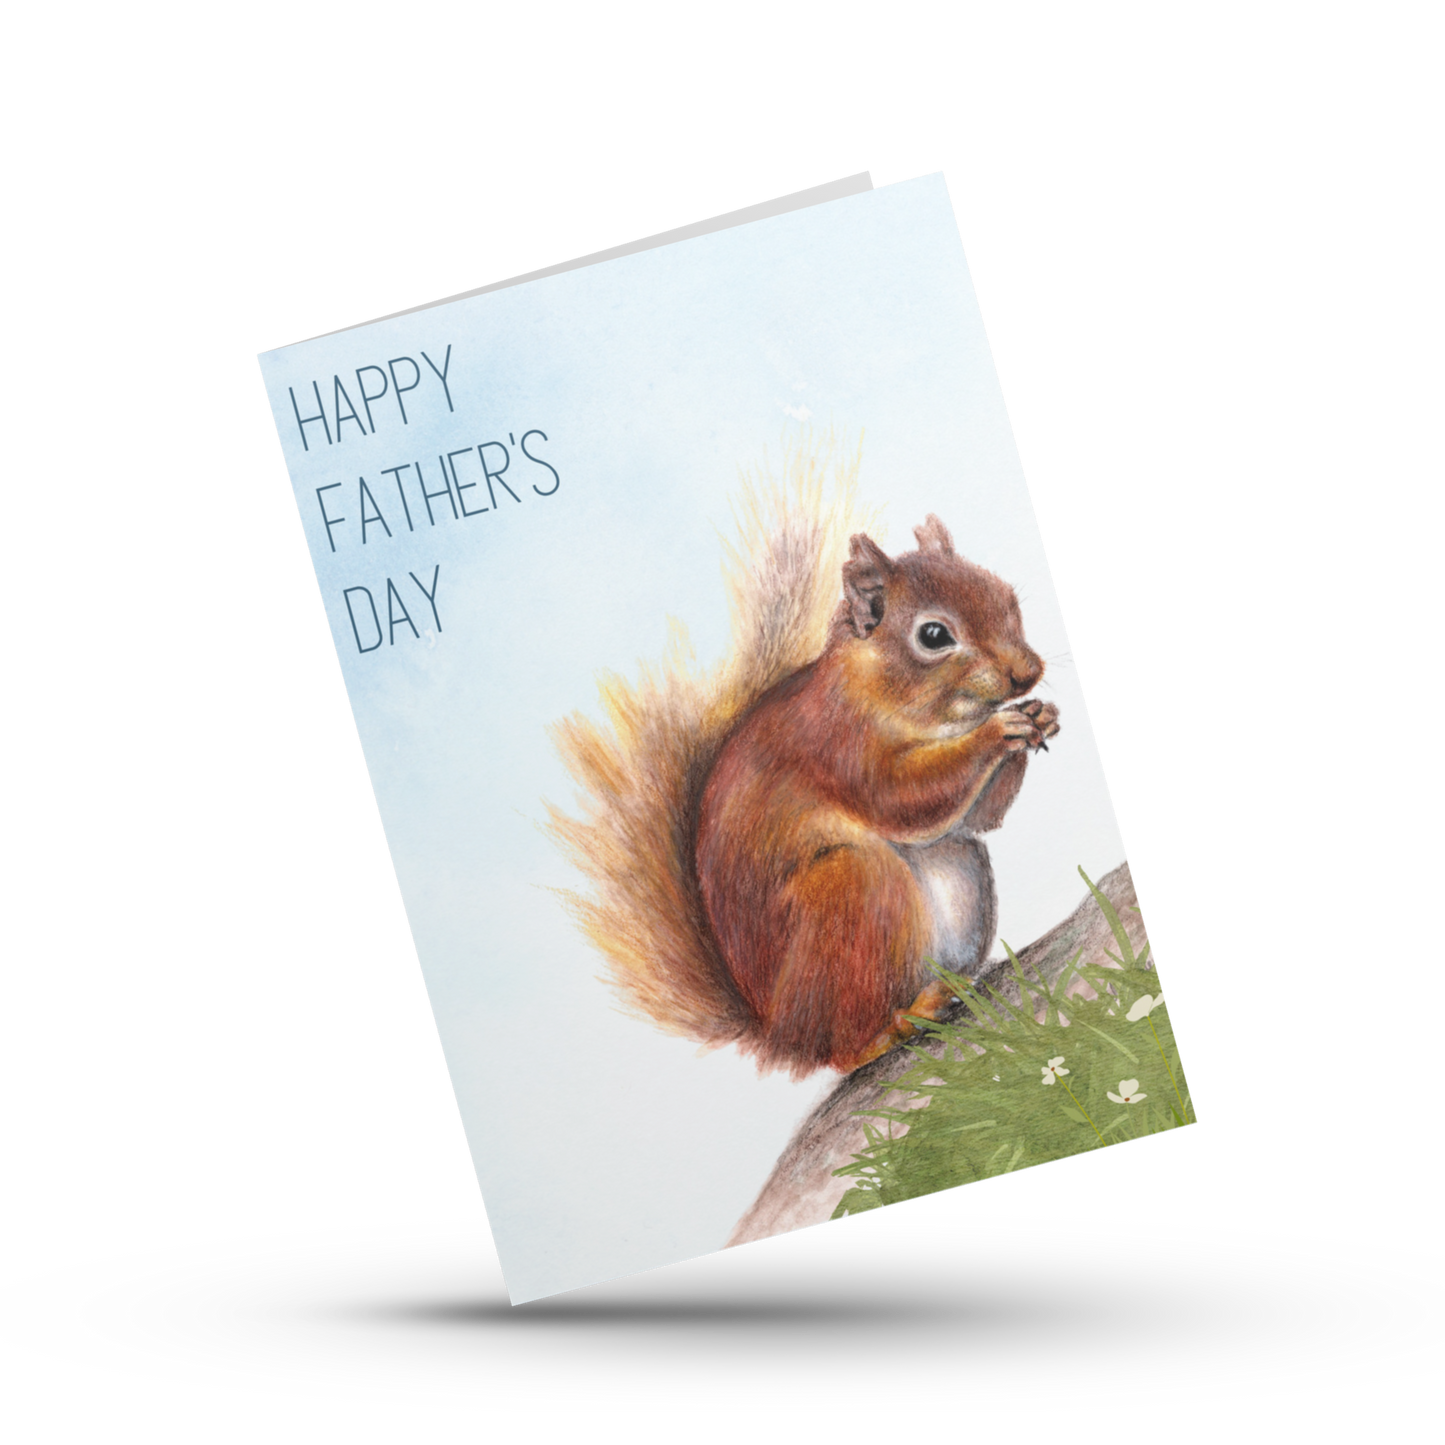 Happy father's day card, Wildlife card for dad, Celebrate dad woodland greeting card, Card for Grandpa, Gift for him,Cute mouse card for dad